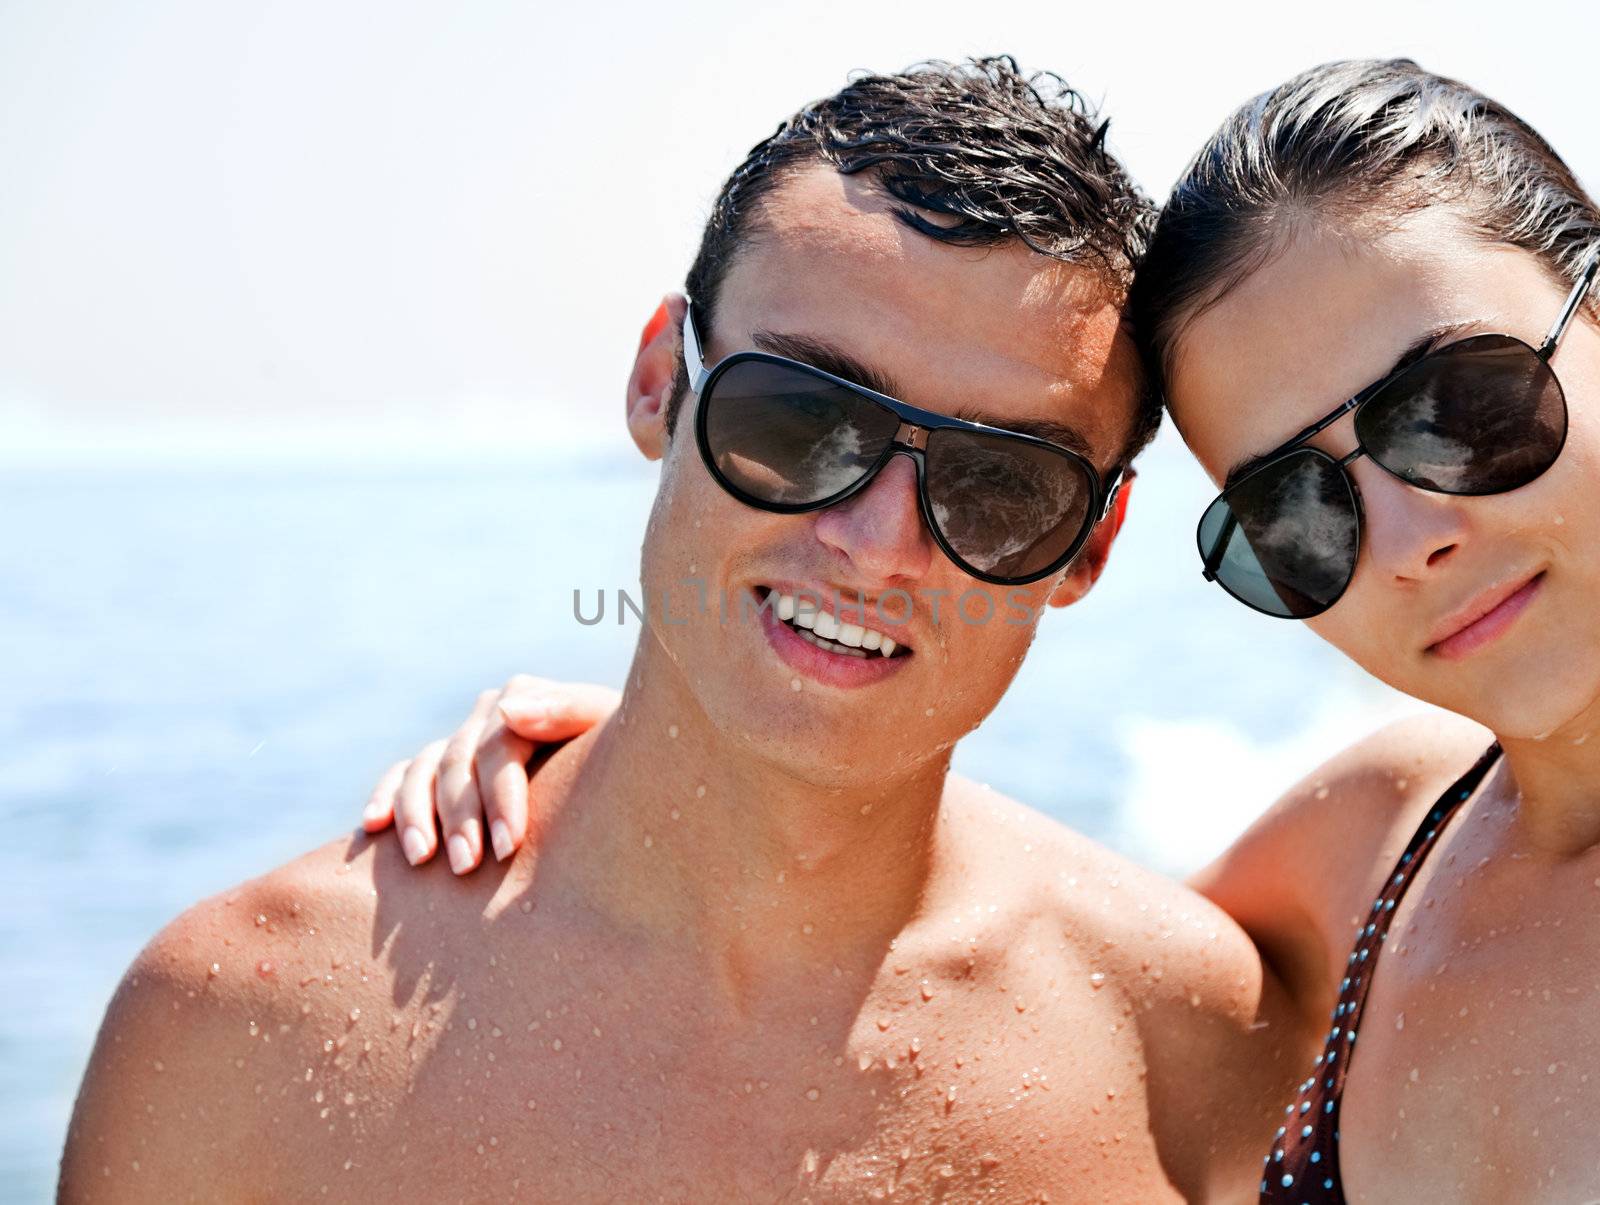 young couple with sunglasses hugging and posing on beach